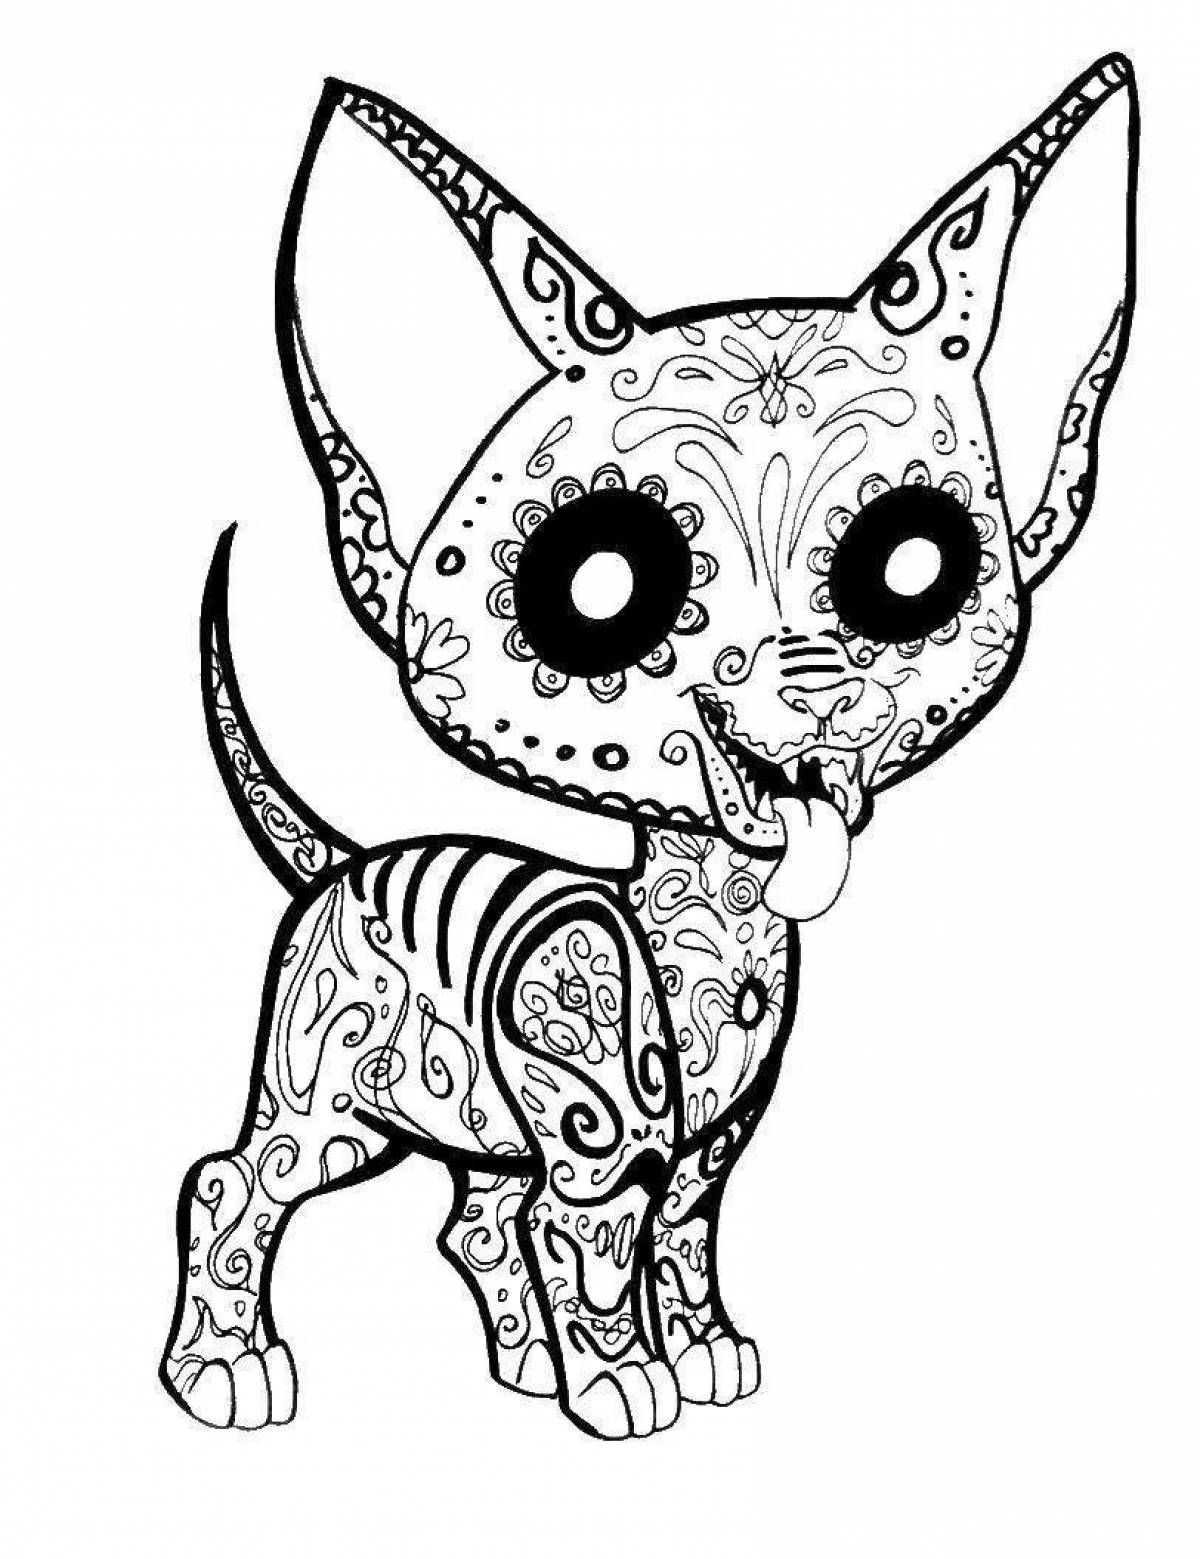 Coloring page playful patterned dog